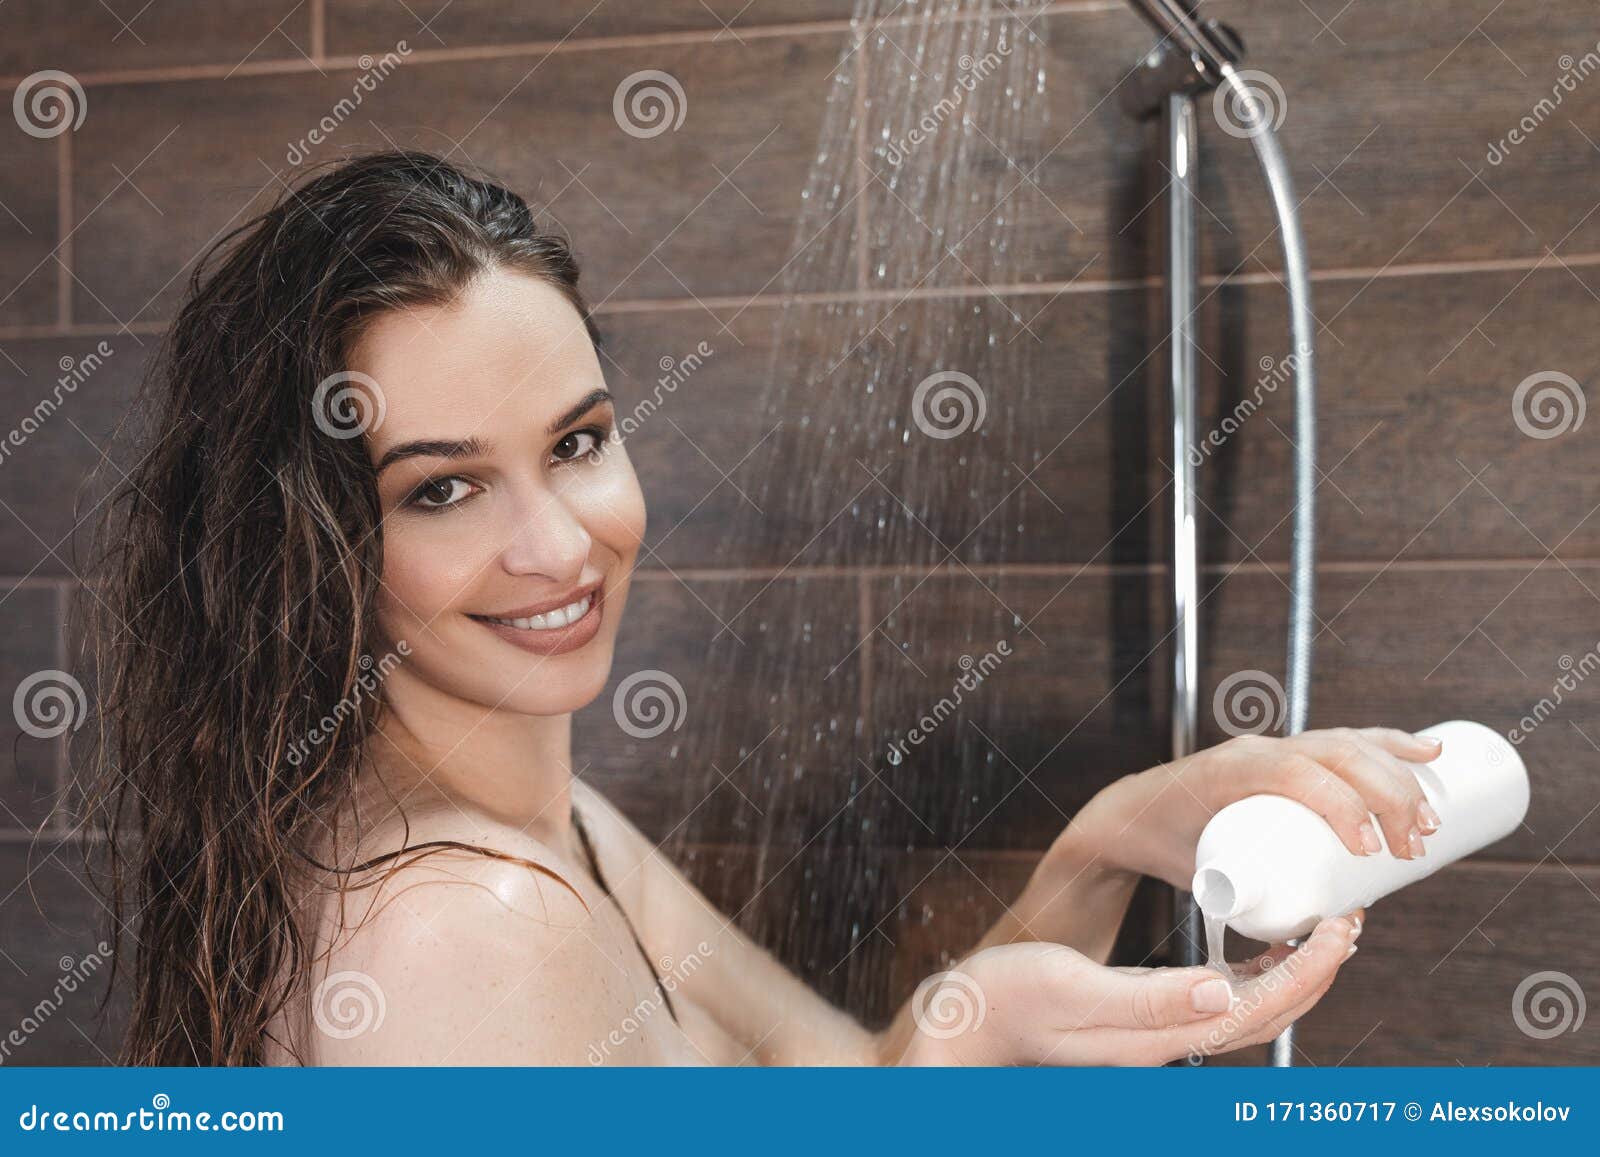 Young Beautiful Caucasian Woman Taking Shower At Home Stock Image Image Of Care Female 171360717 